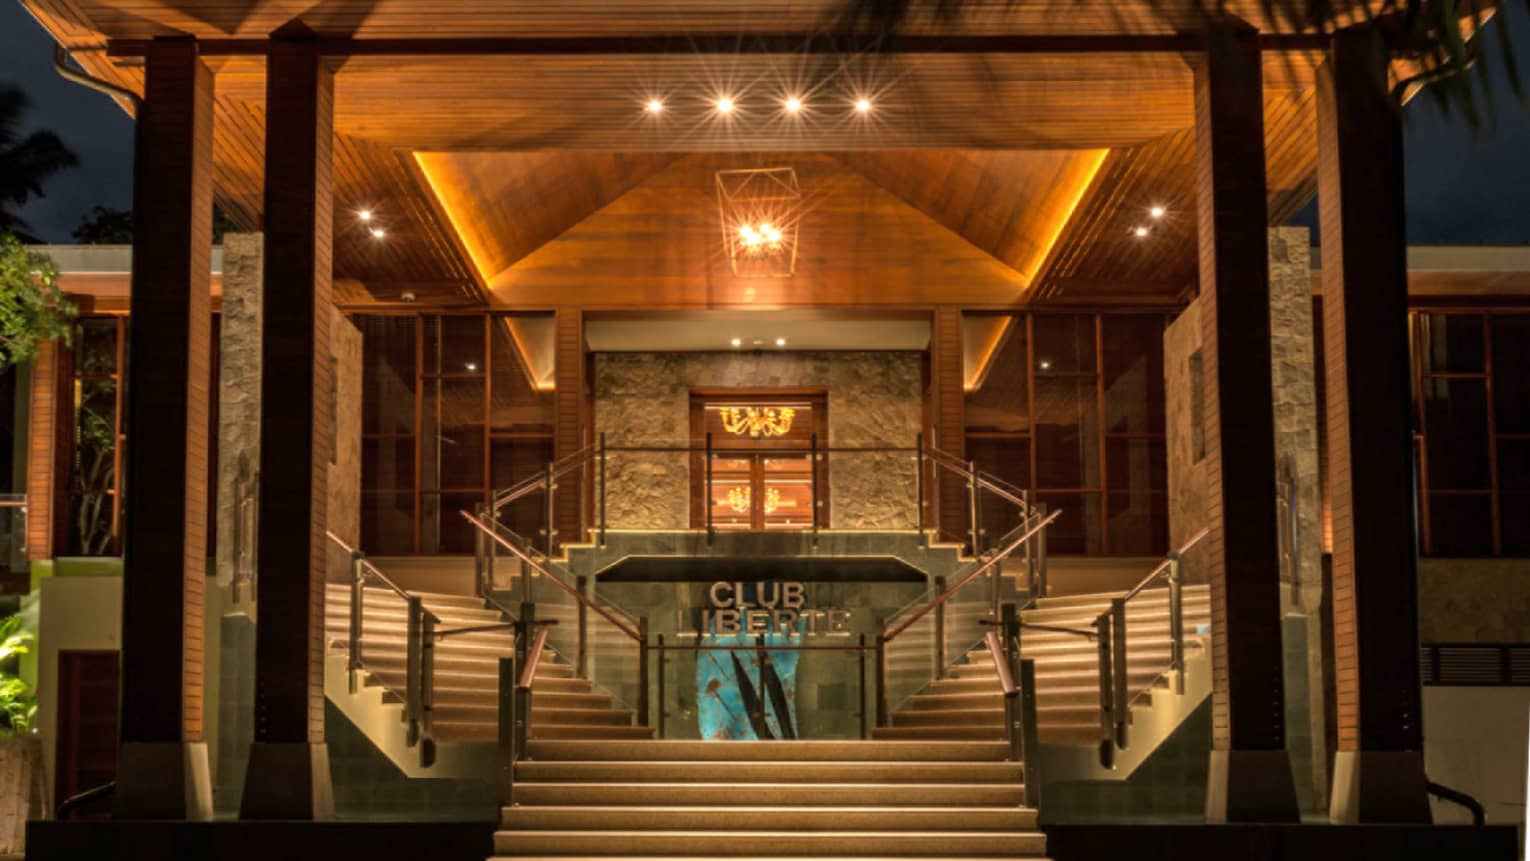 Entrance to Club Liberte, illuminated at night, two stair cases on each side of entry way